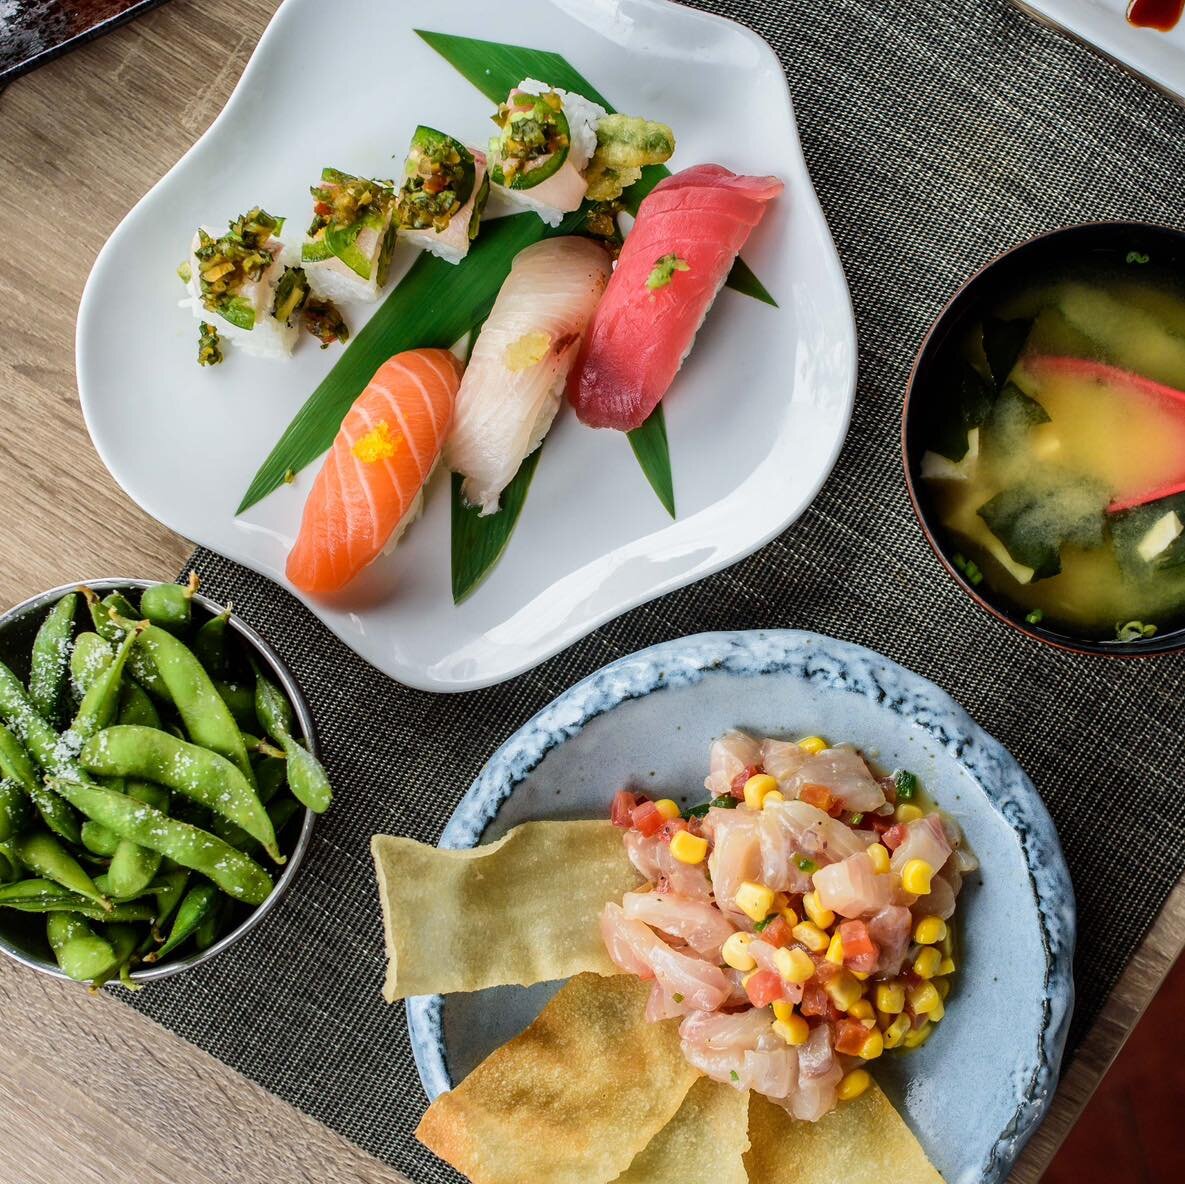 Today is the perfect day to get your #sushifix on our lovely patio! 🍣🥢🍶🍻

📷: Chef&rsquo;s Sushi Platter
Edamame, Today&rsquo;s Miso Soup, Snapper Miso Ceviche, 3 pcs Nigiri (Tuna , Kanpachi, Salmon), Yellowtail Cilantro Roll 4pcs

Click through 